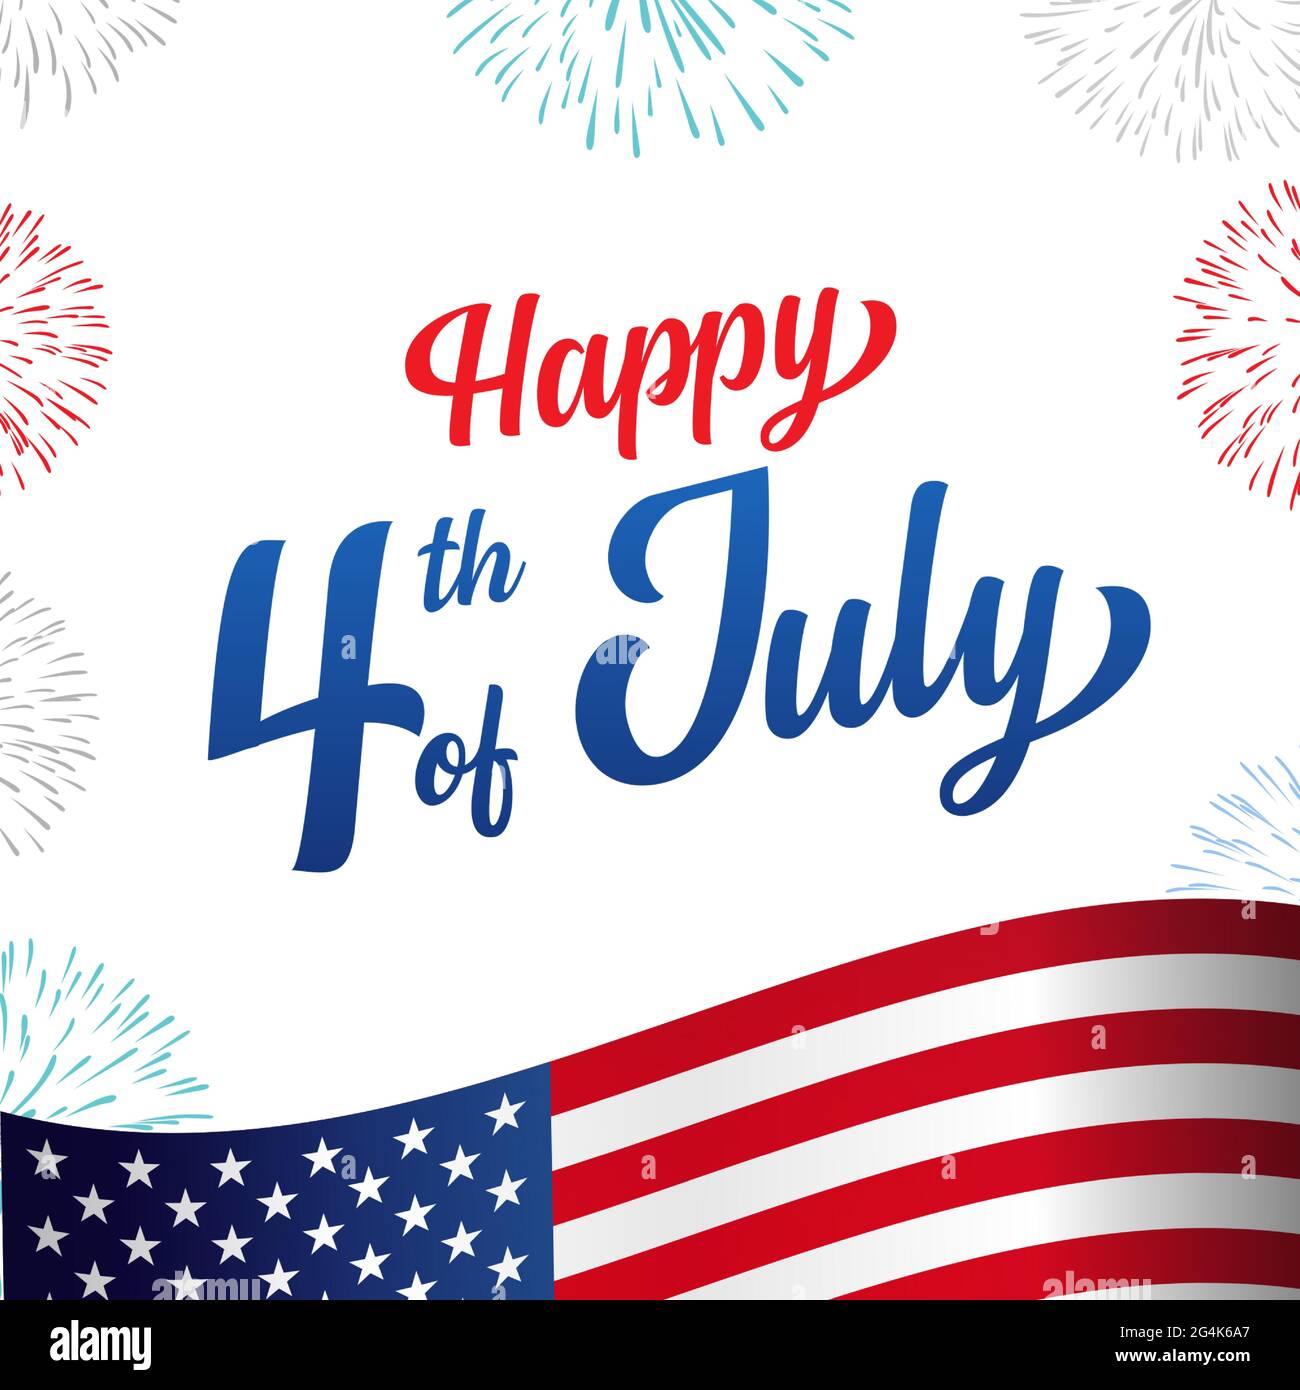 Happy 4th of July USA Independence Day greeting card with flag